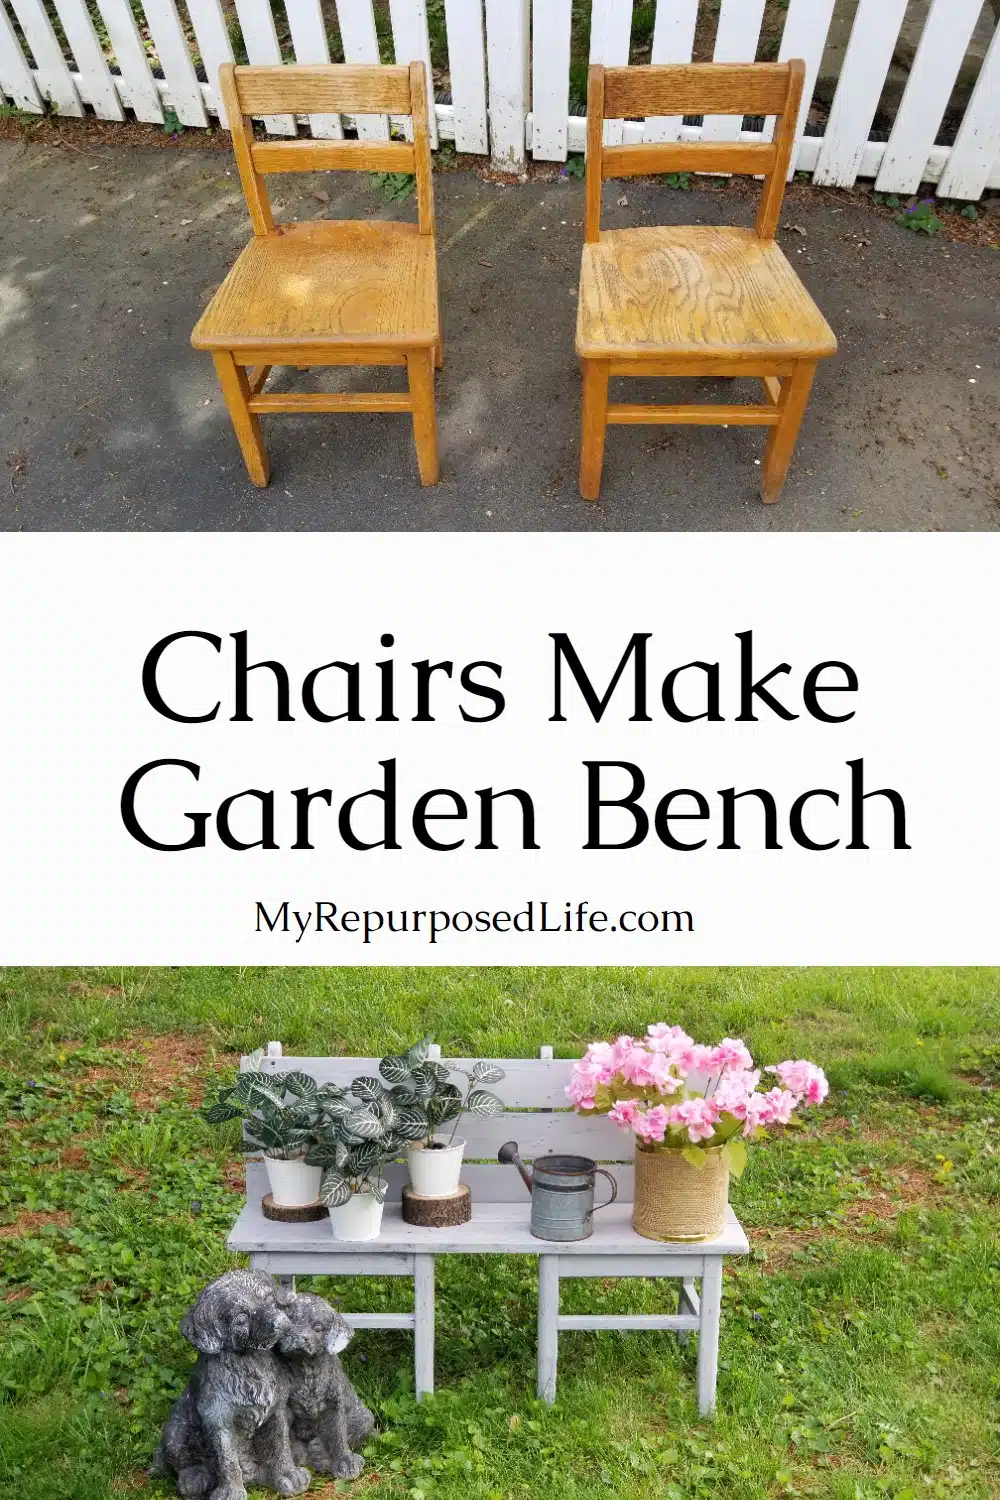 Do you ever have one of those projects you just want to put aside and forget it? This was an easy build, the struggle was the paint. It started out as a kid's bench, but ended up being a bench for the garden. That's when I finally knew what color it should be. #MyRepurposedLife #repurposed #chairs #furniture #garden #bench via @repurposedlife